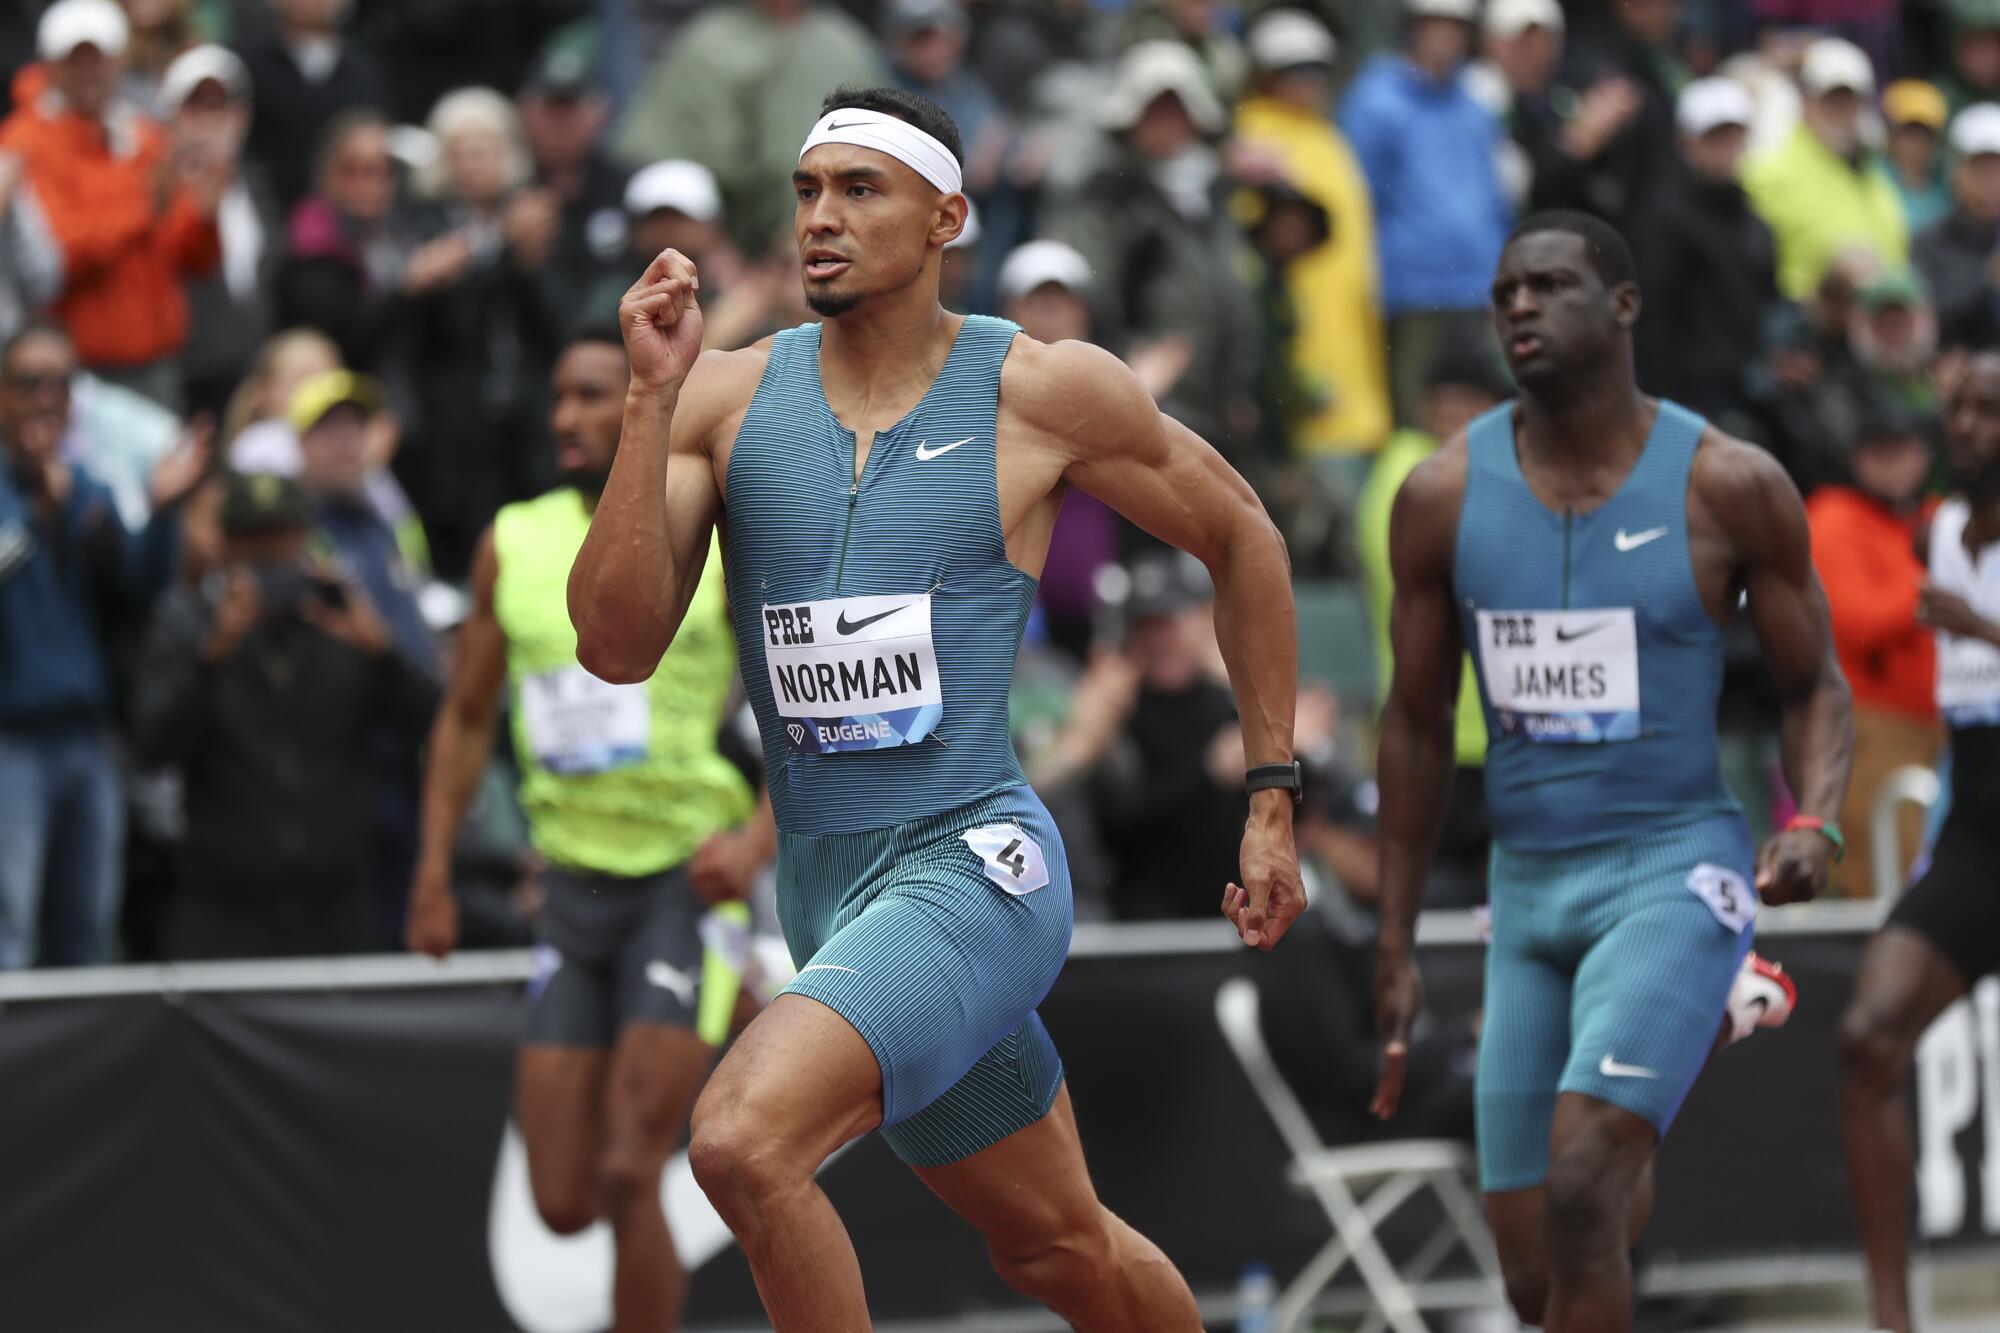 United States' Michael Norman, center, runs in the men's 400 meters during the Prefontaine Classic.